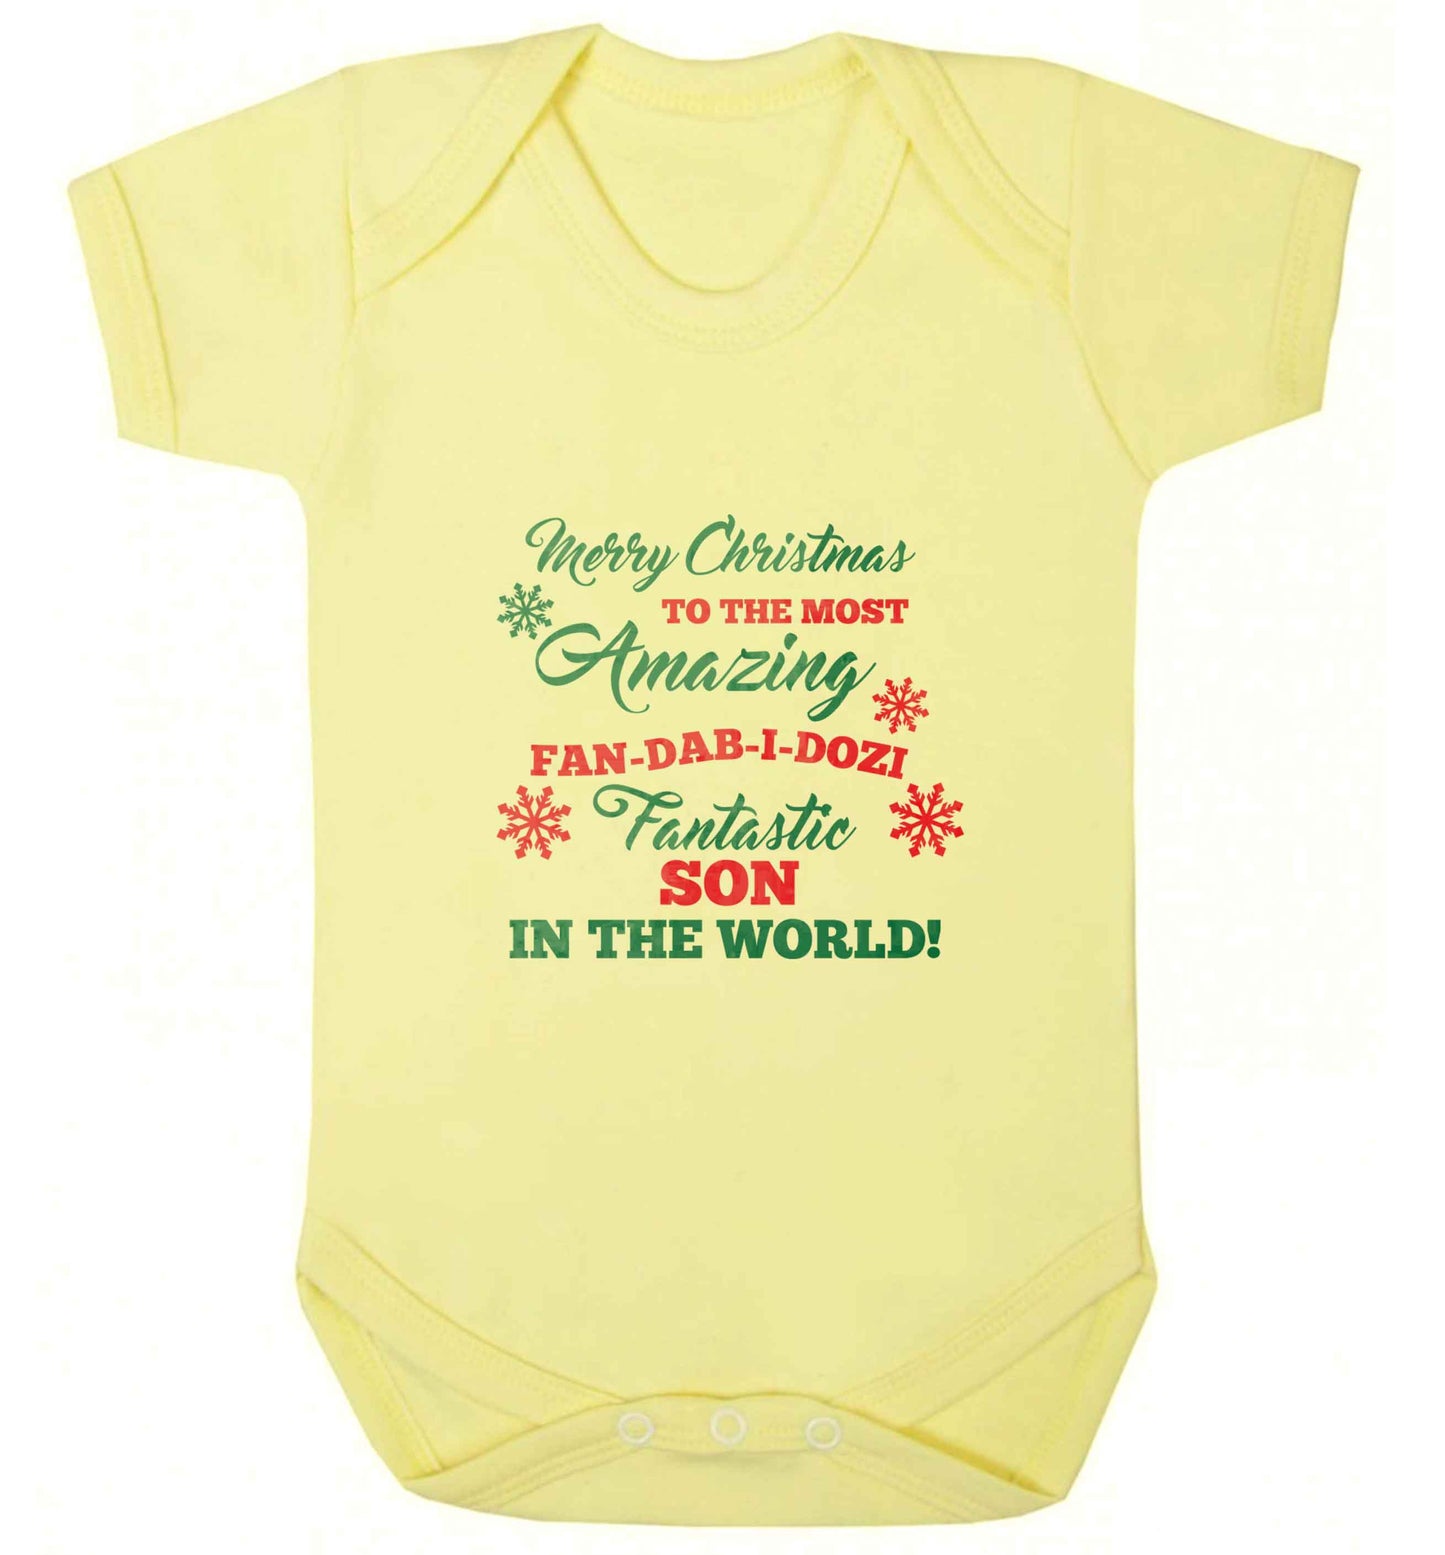 Merry Christmas to the most amazing fan-dab-i-dozi fantasic Son in the world baby vest pale yellow 18-24 months